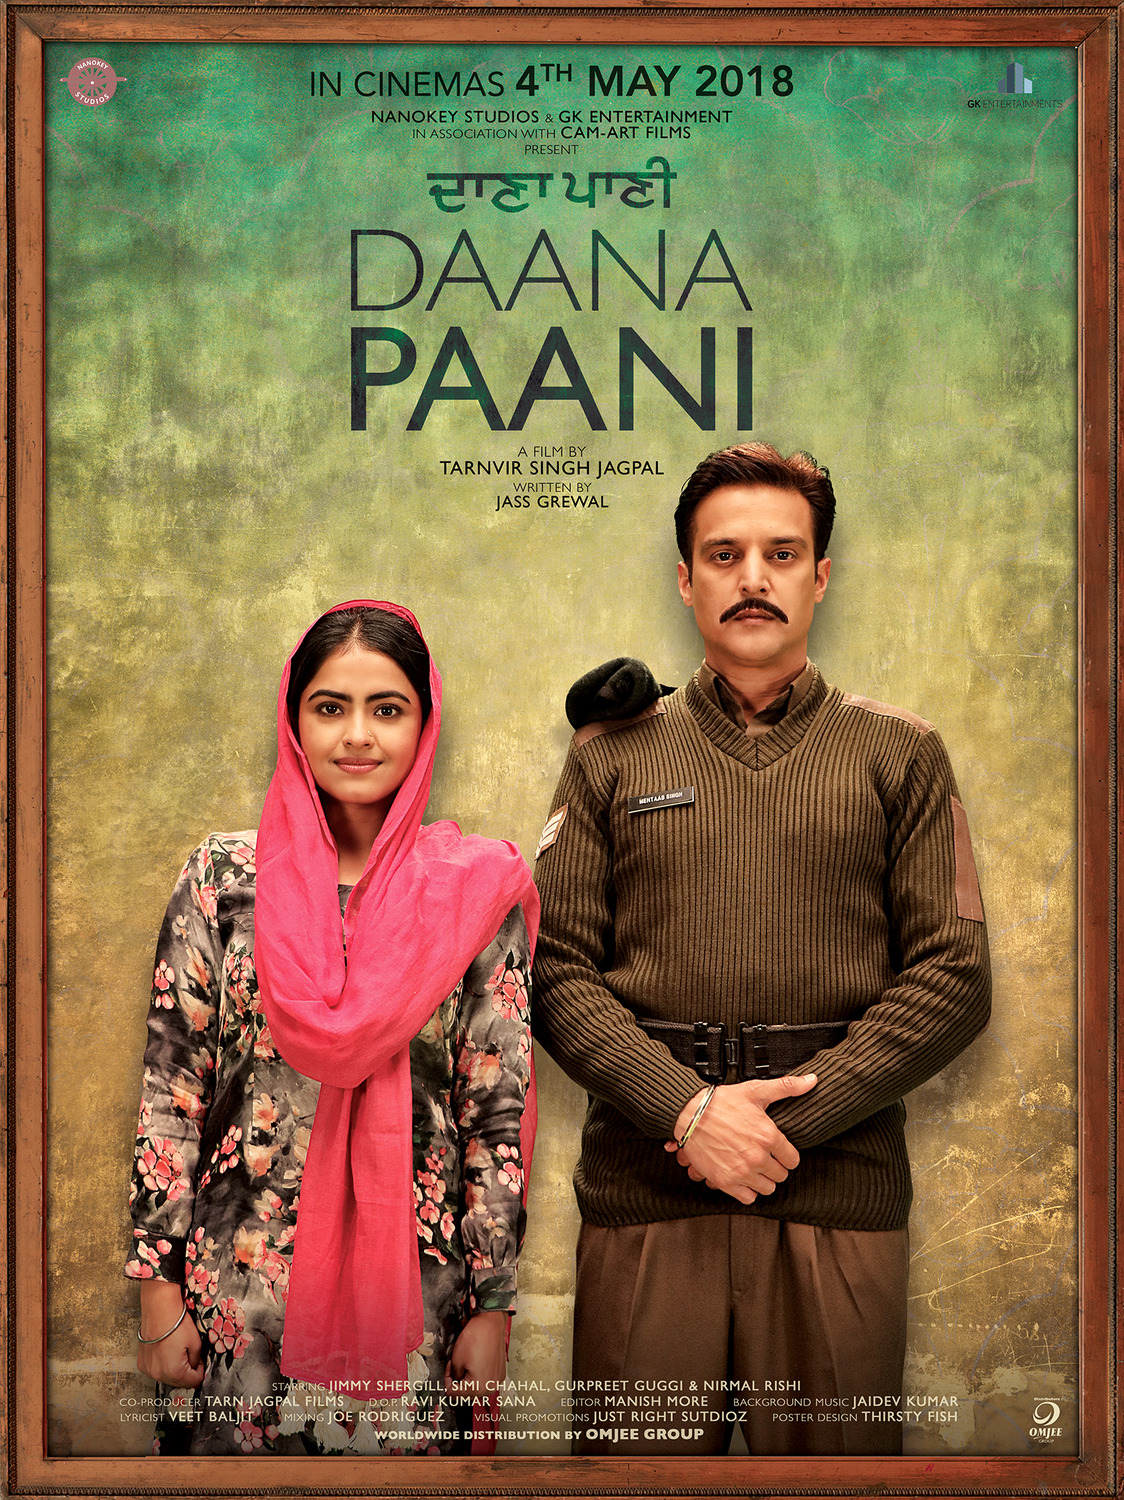 Extra Large Movie Poster Image for Daana Paani (#2 of 3)